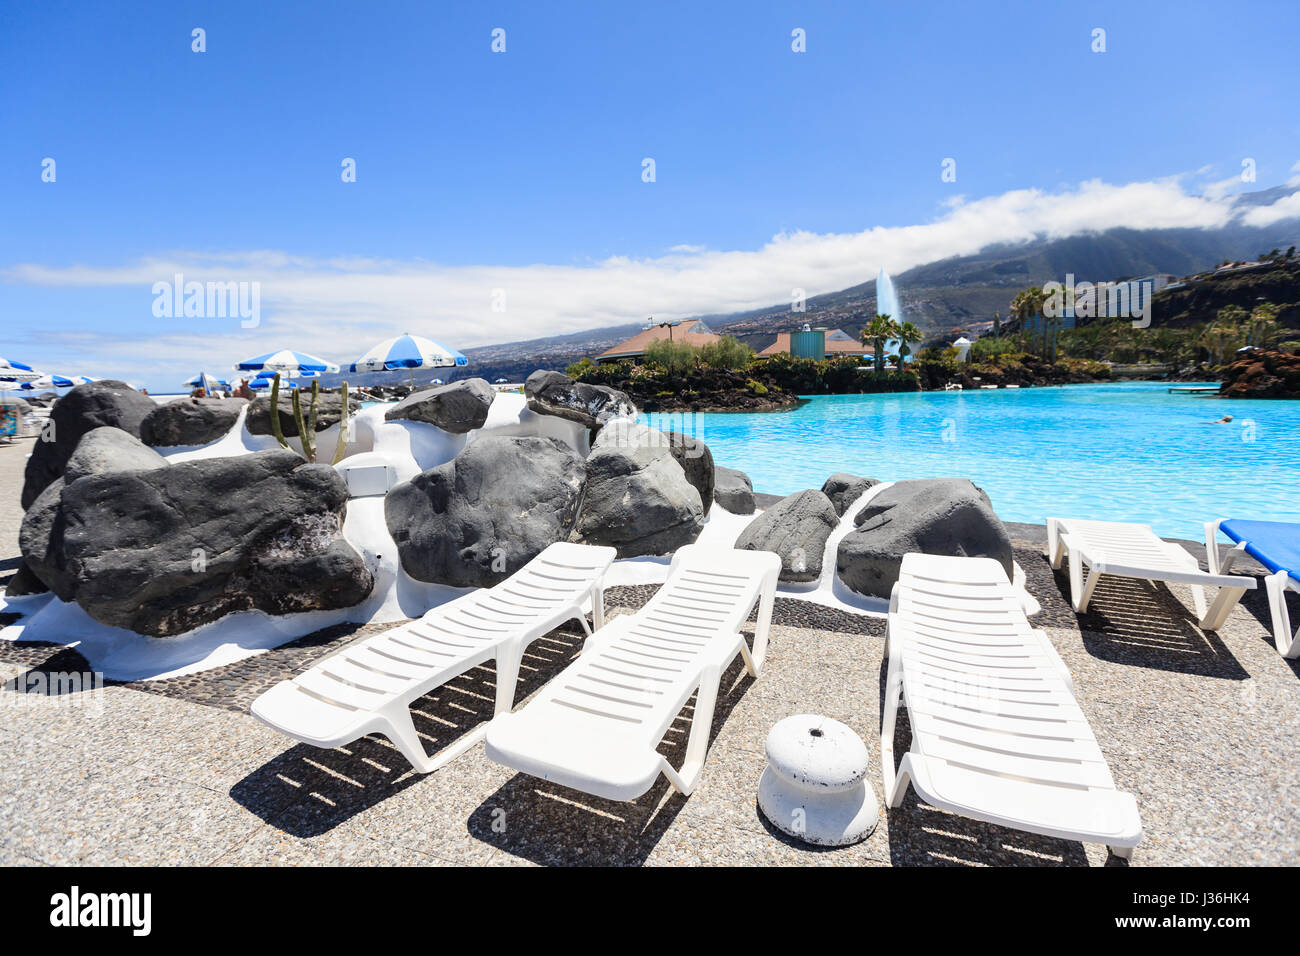 Entertainment center Lago Martianez with pools with oceanic water Stock Photo